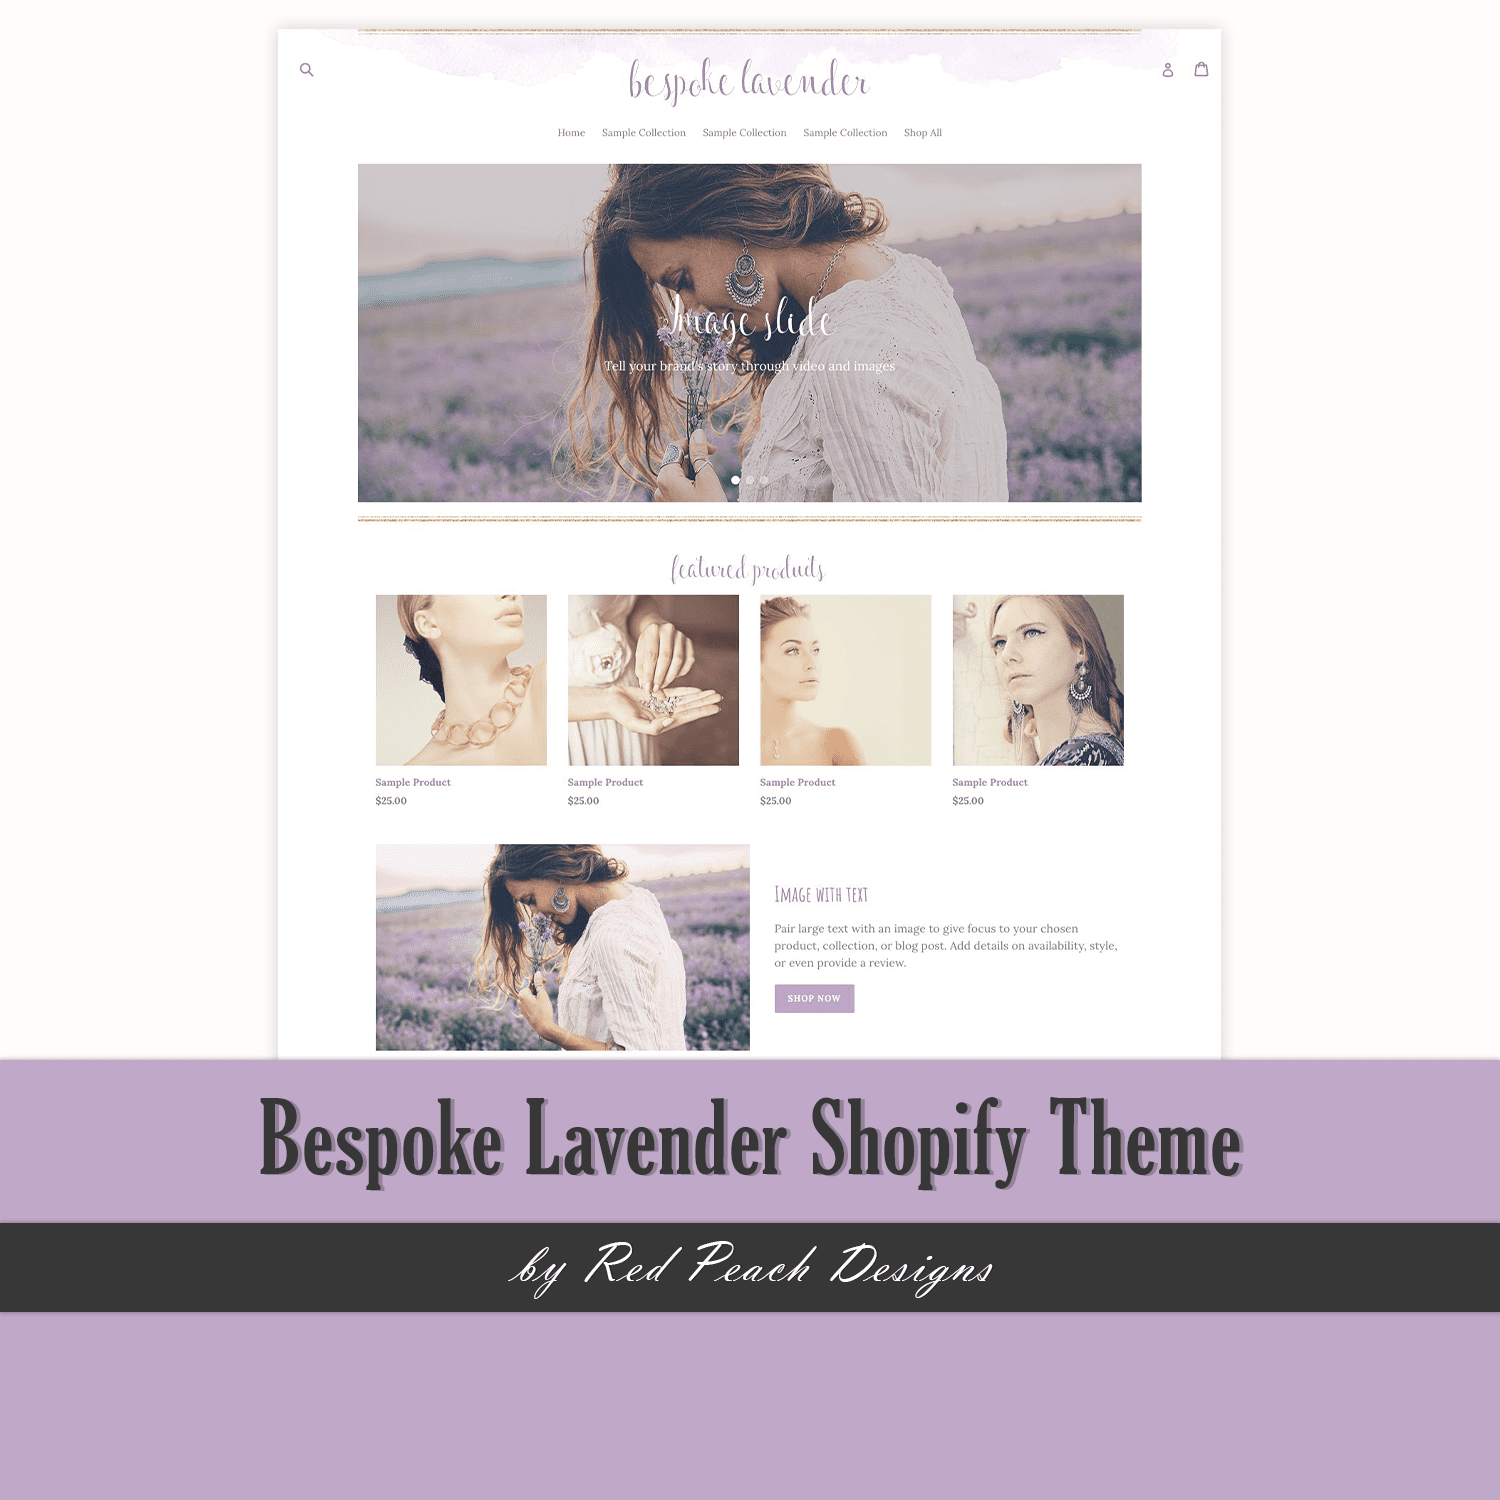 Bespoke Lavender Shopify Theme created by Red Peach Designs.